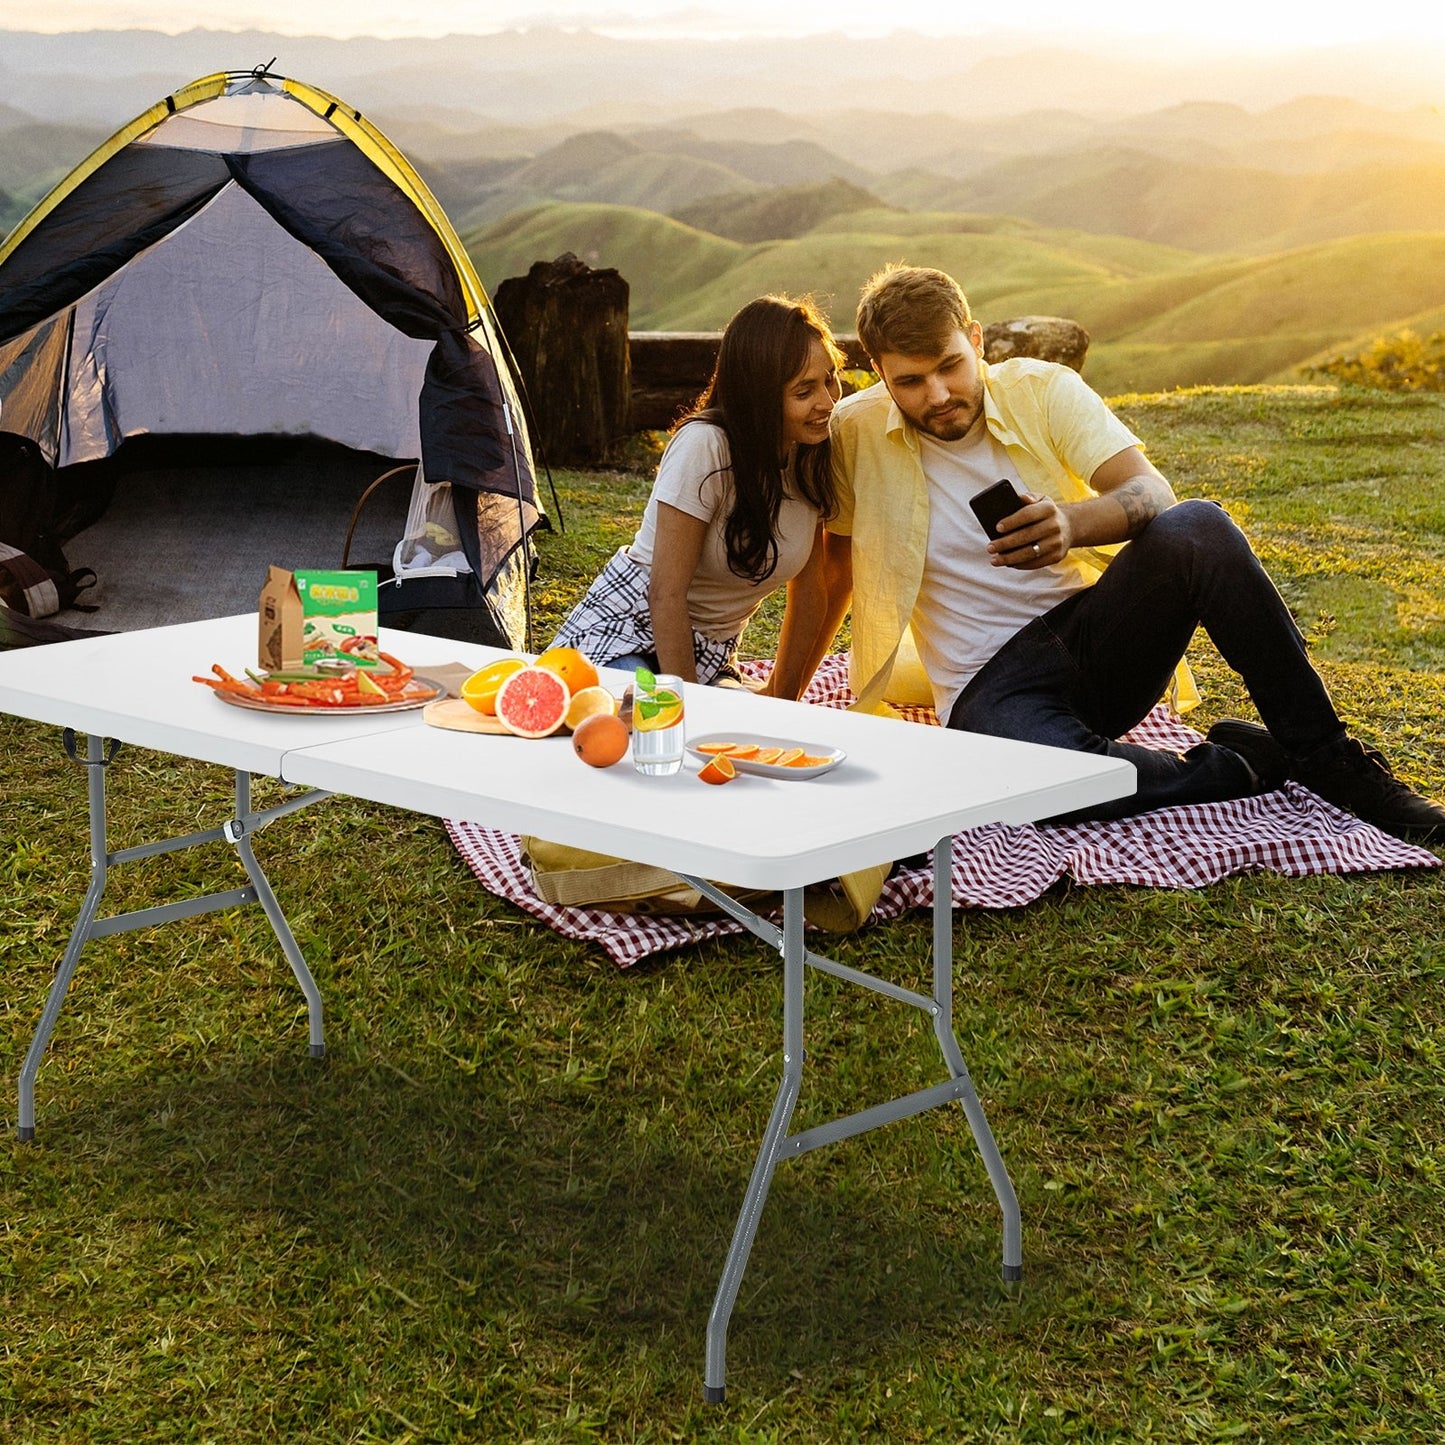 6' Folding Portable Plastic Outdoor Camp Table, White Camping Furniture   at Gallery Canada